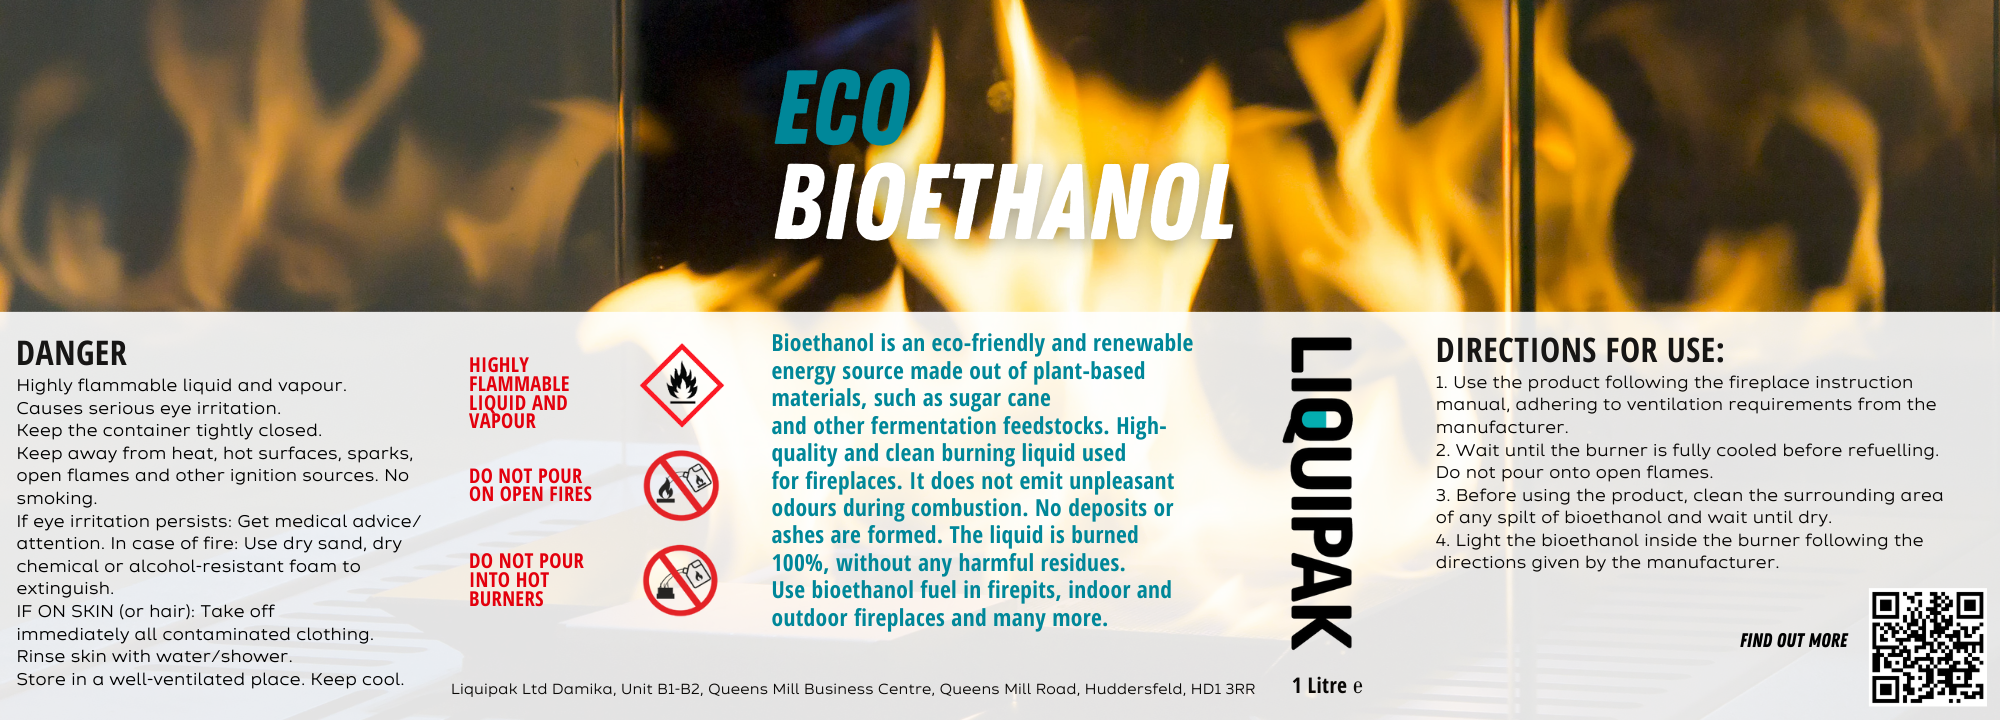 1L Bioethanol Fuel For Fireplaces